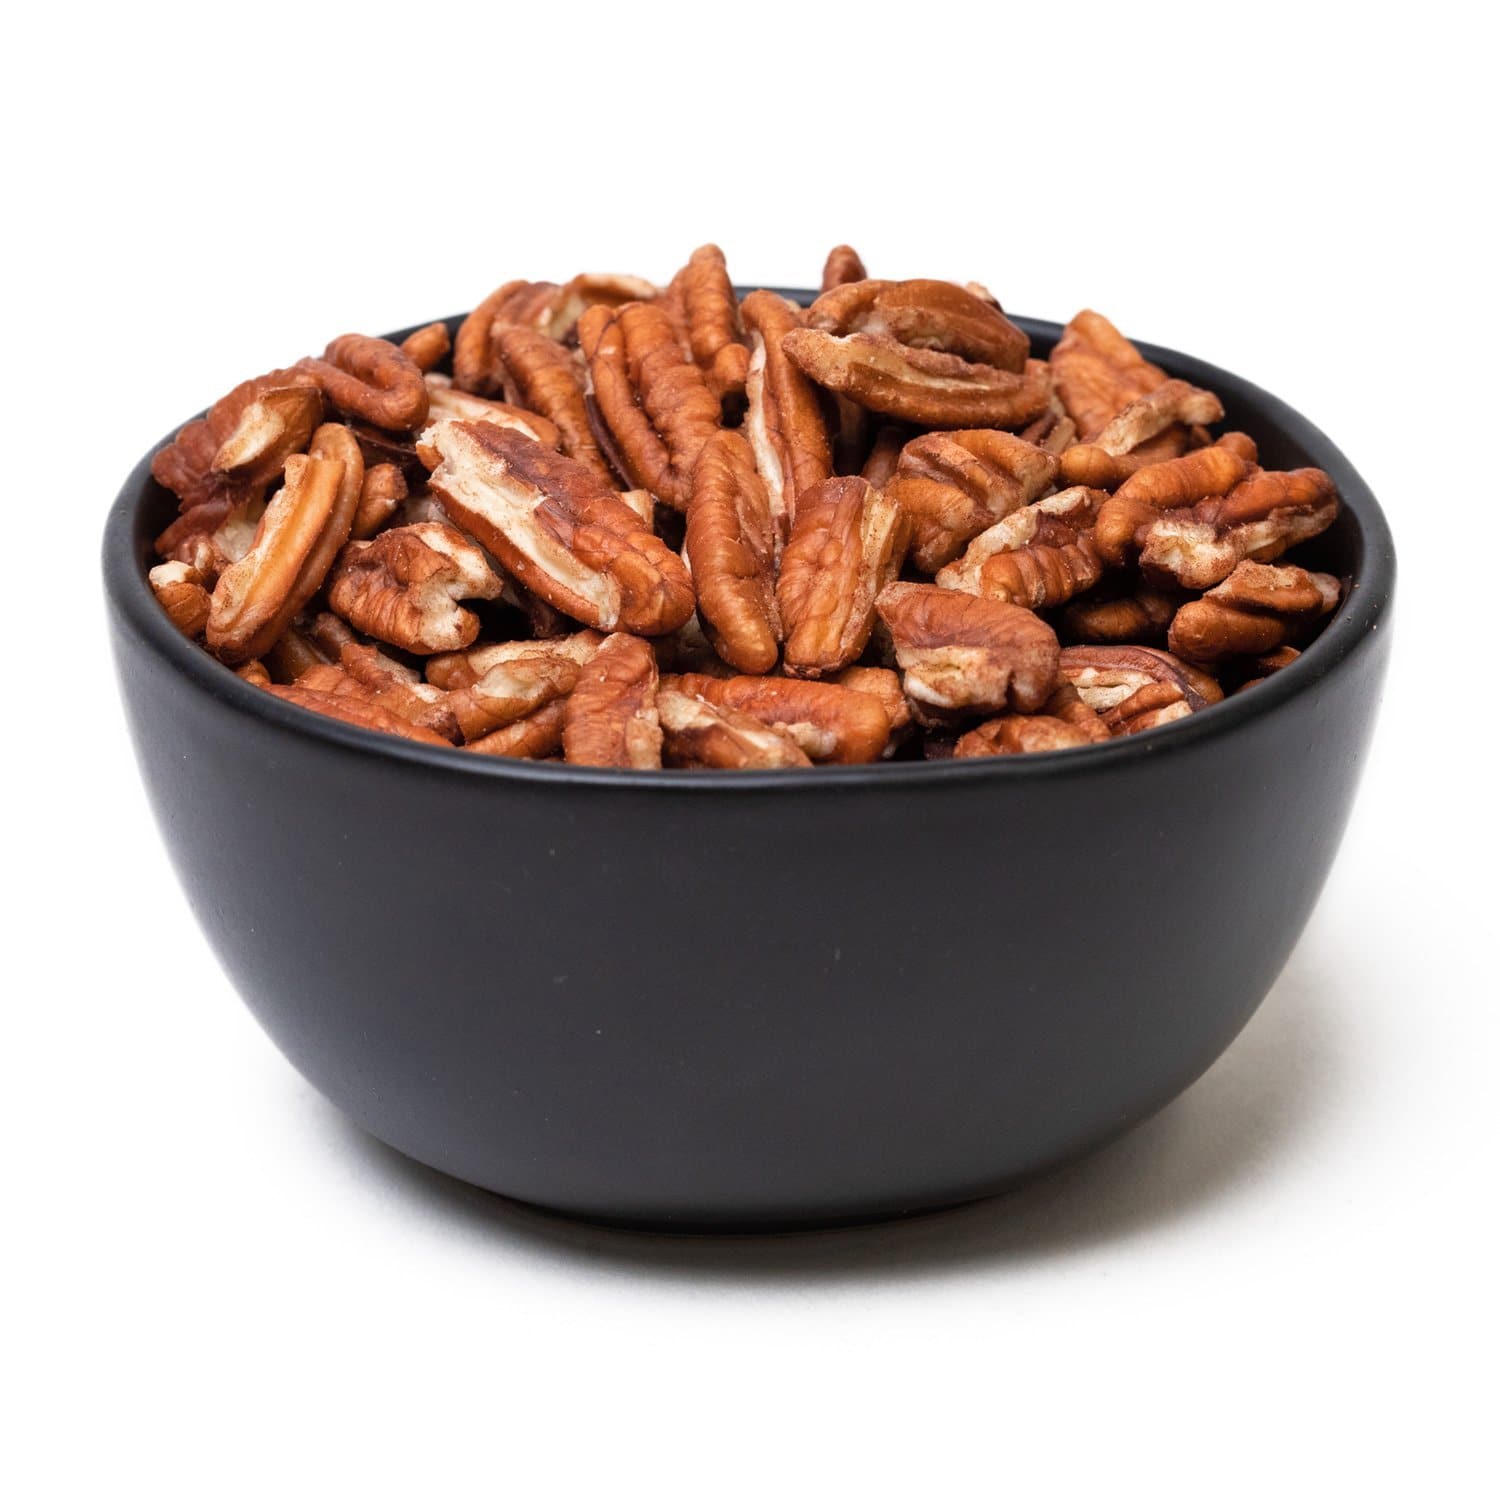 A black bowl filled with brown California grown pecan pieces against a white background.